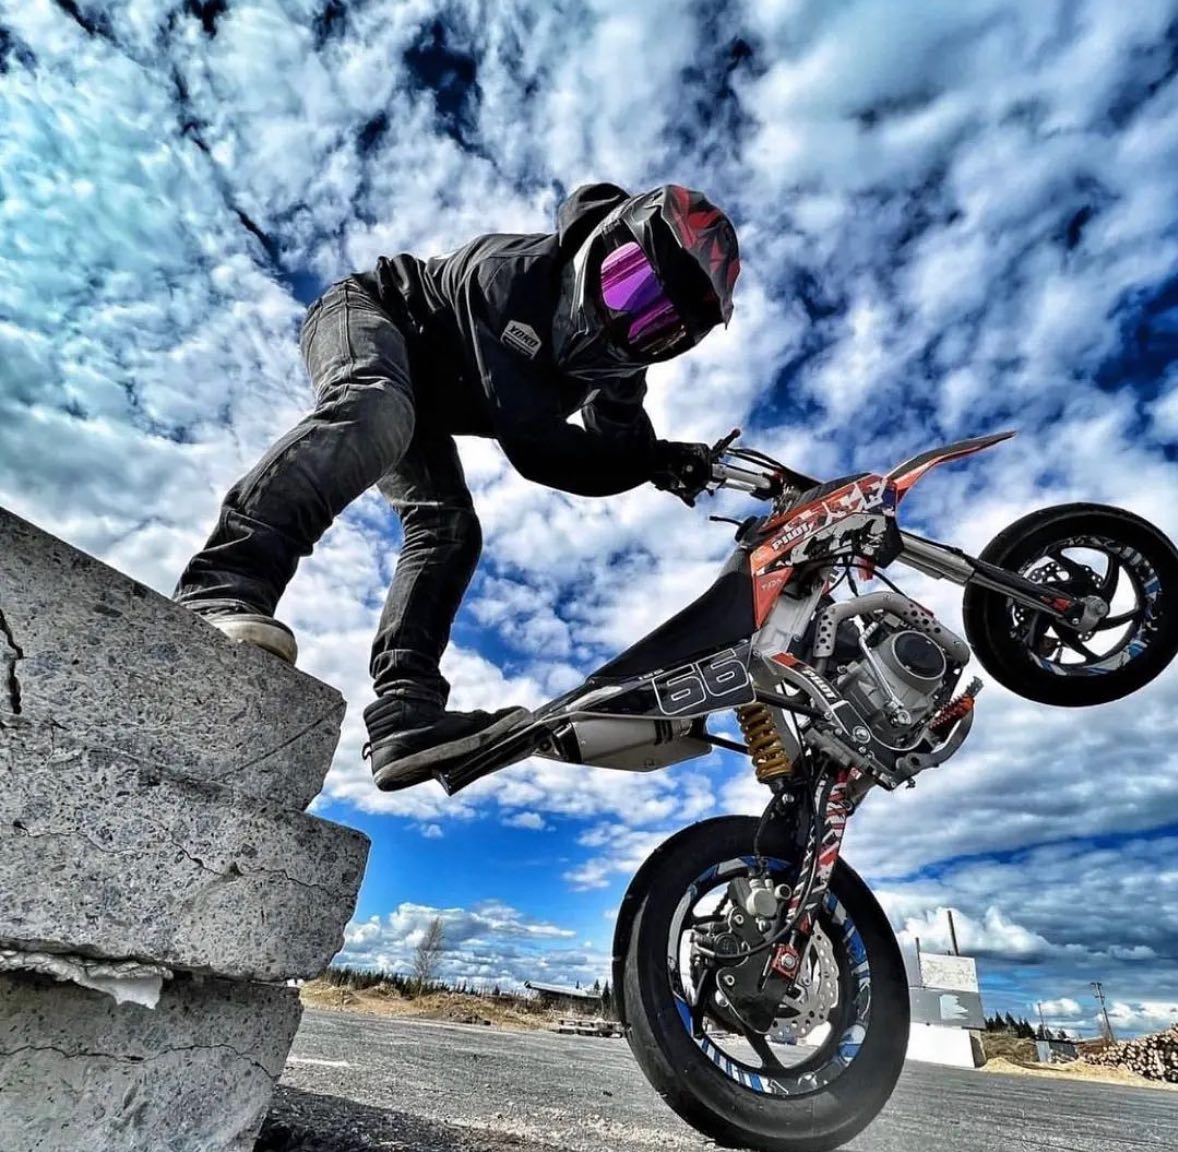 Ready for a new week ?! 💪🤛
—
#ycf #supermoto #moto #motorcycle